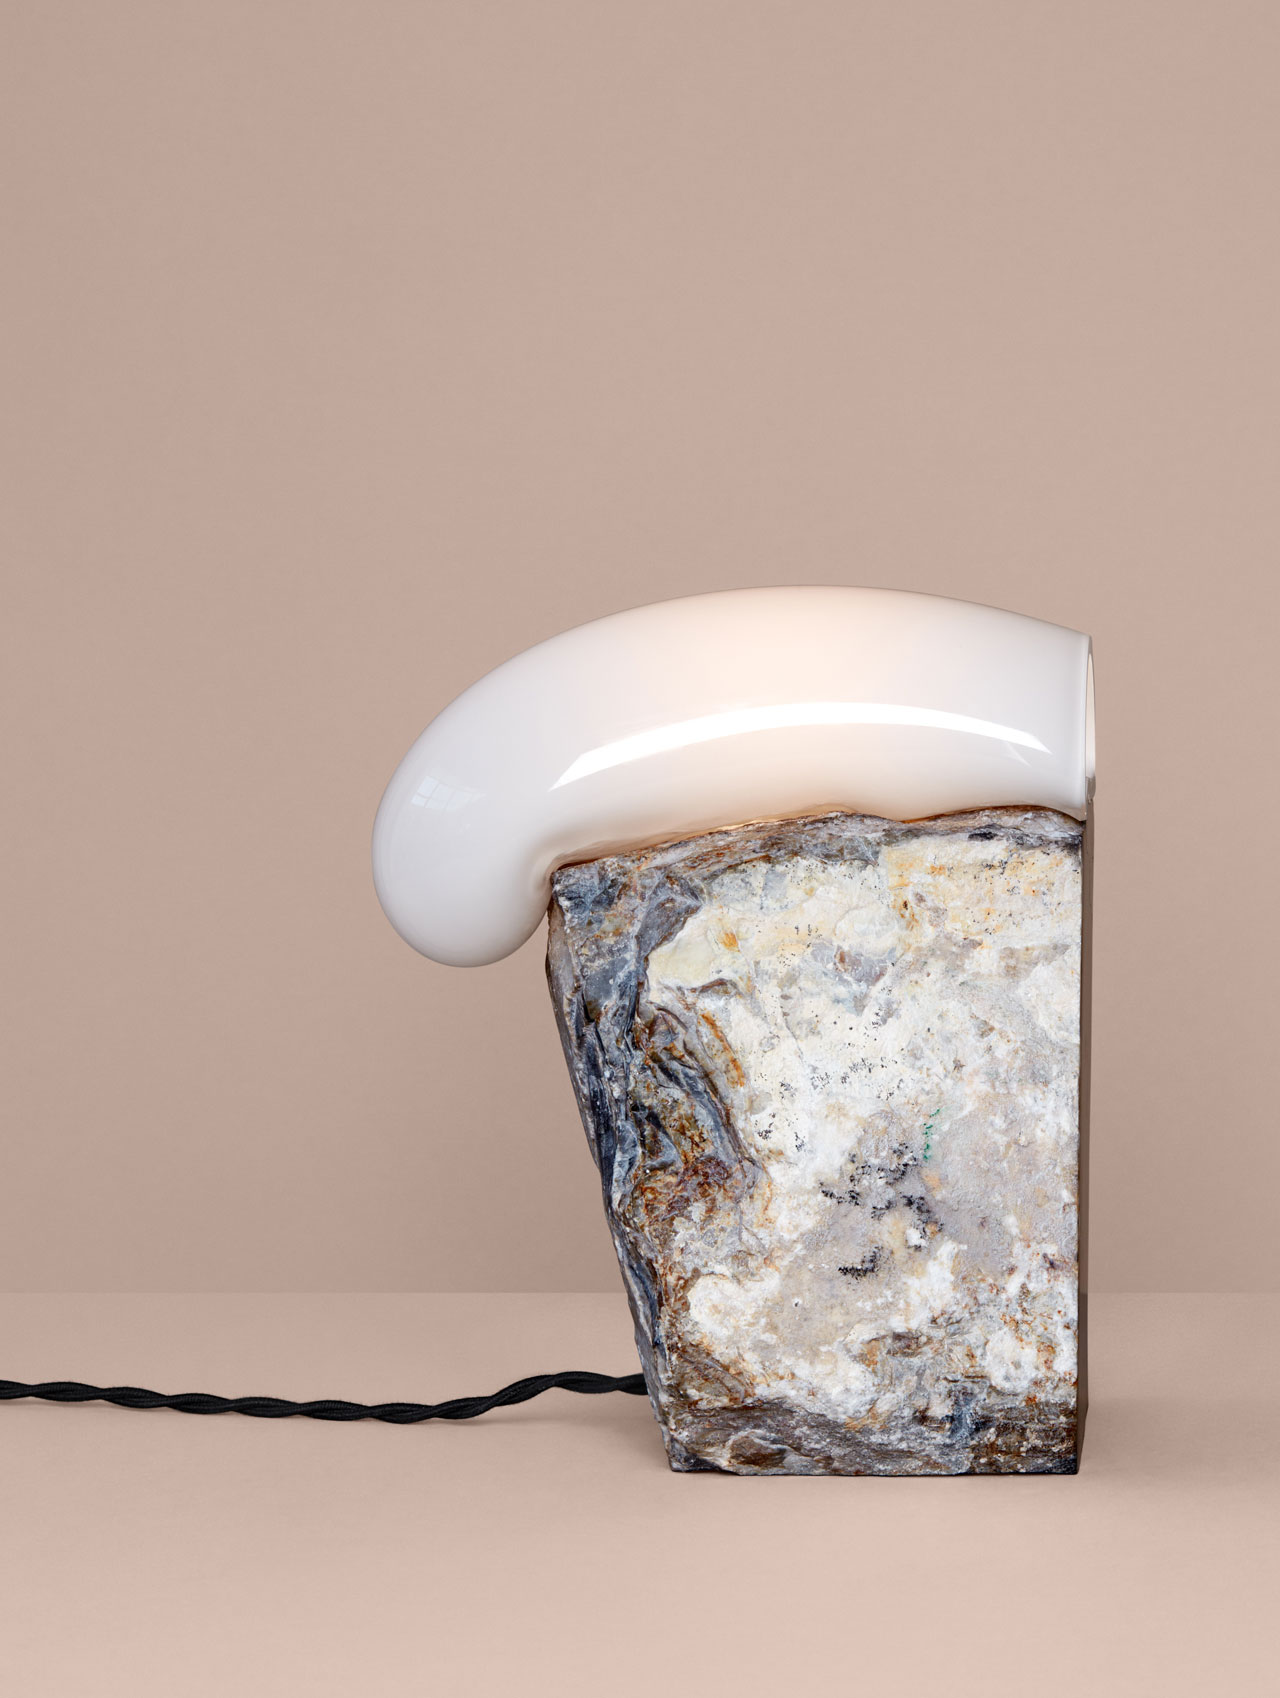 Catch Rock table lamp by Lindsey Adelman for Nilufar Gallery.Photo © Lauren Coleman.